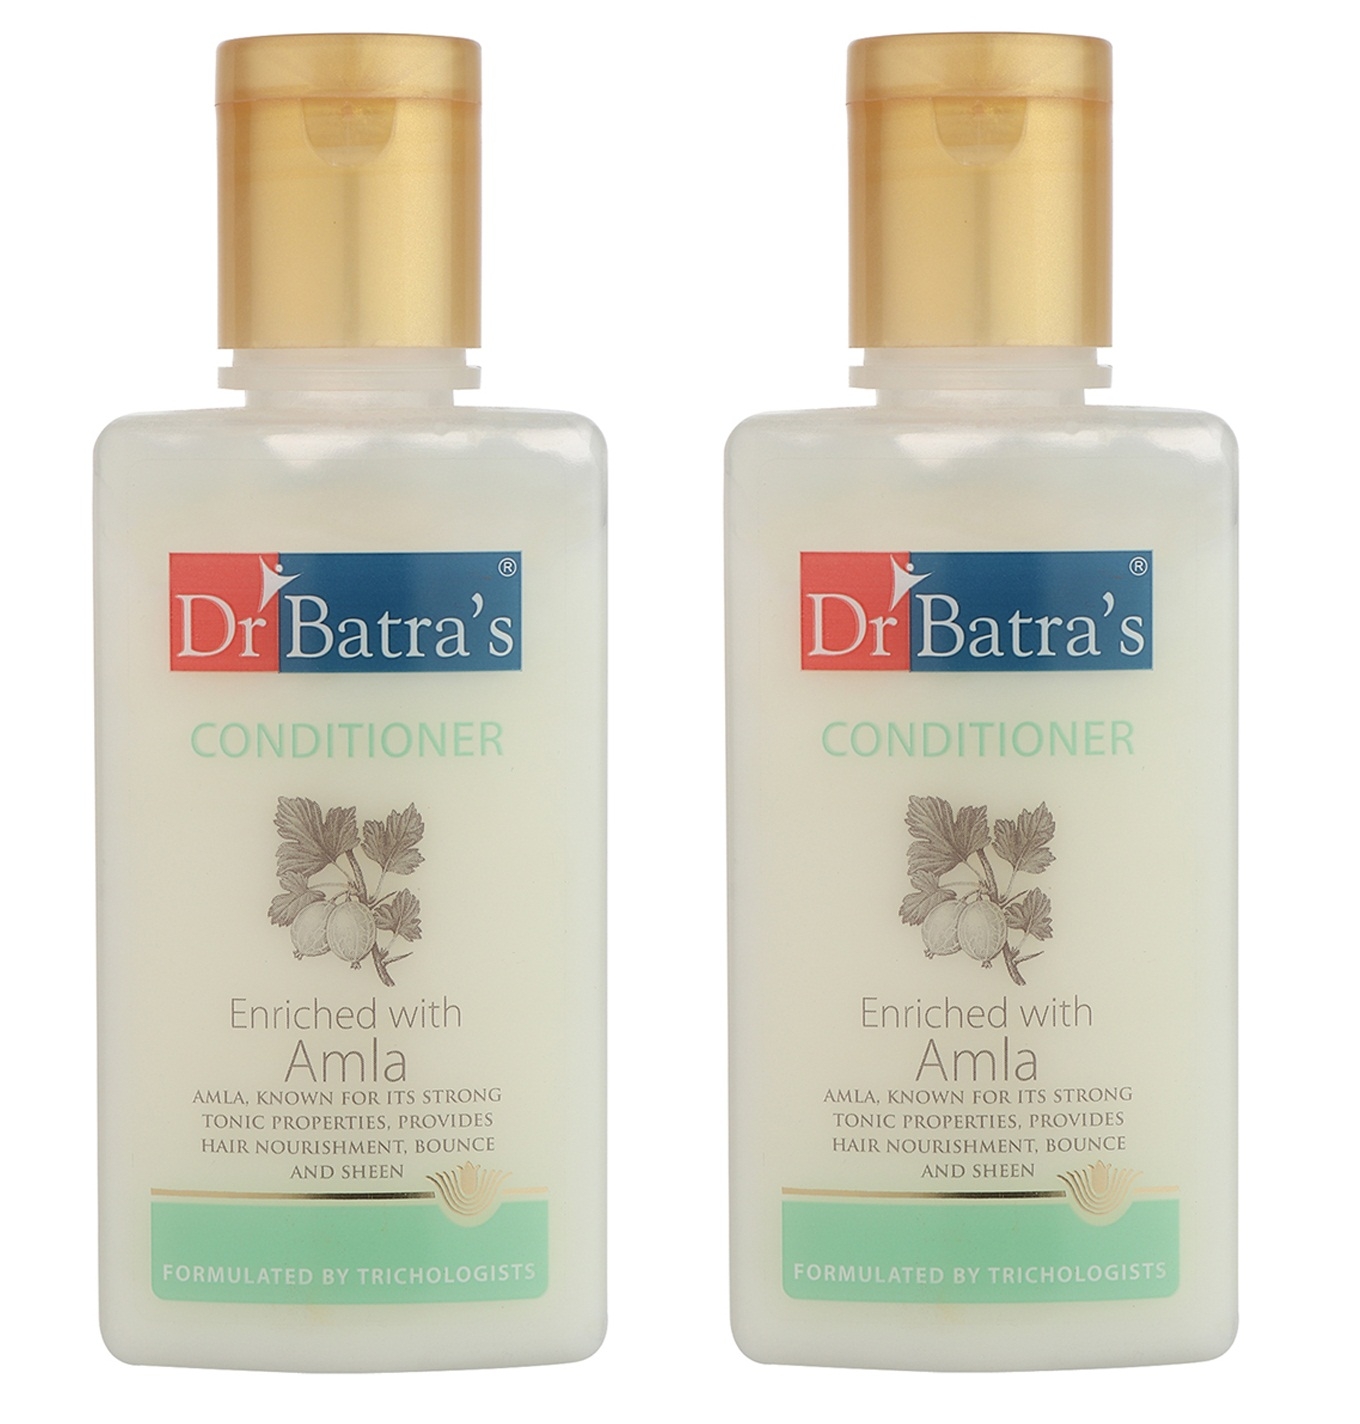 Dr Batra's | Dr Batra's Conditioner Enriched With Amla - 100 ml (Pack of 2)